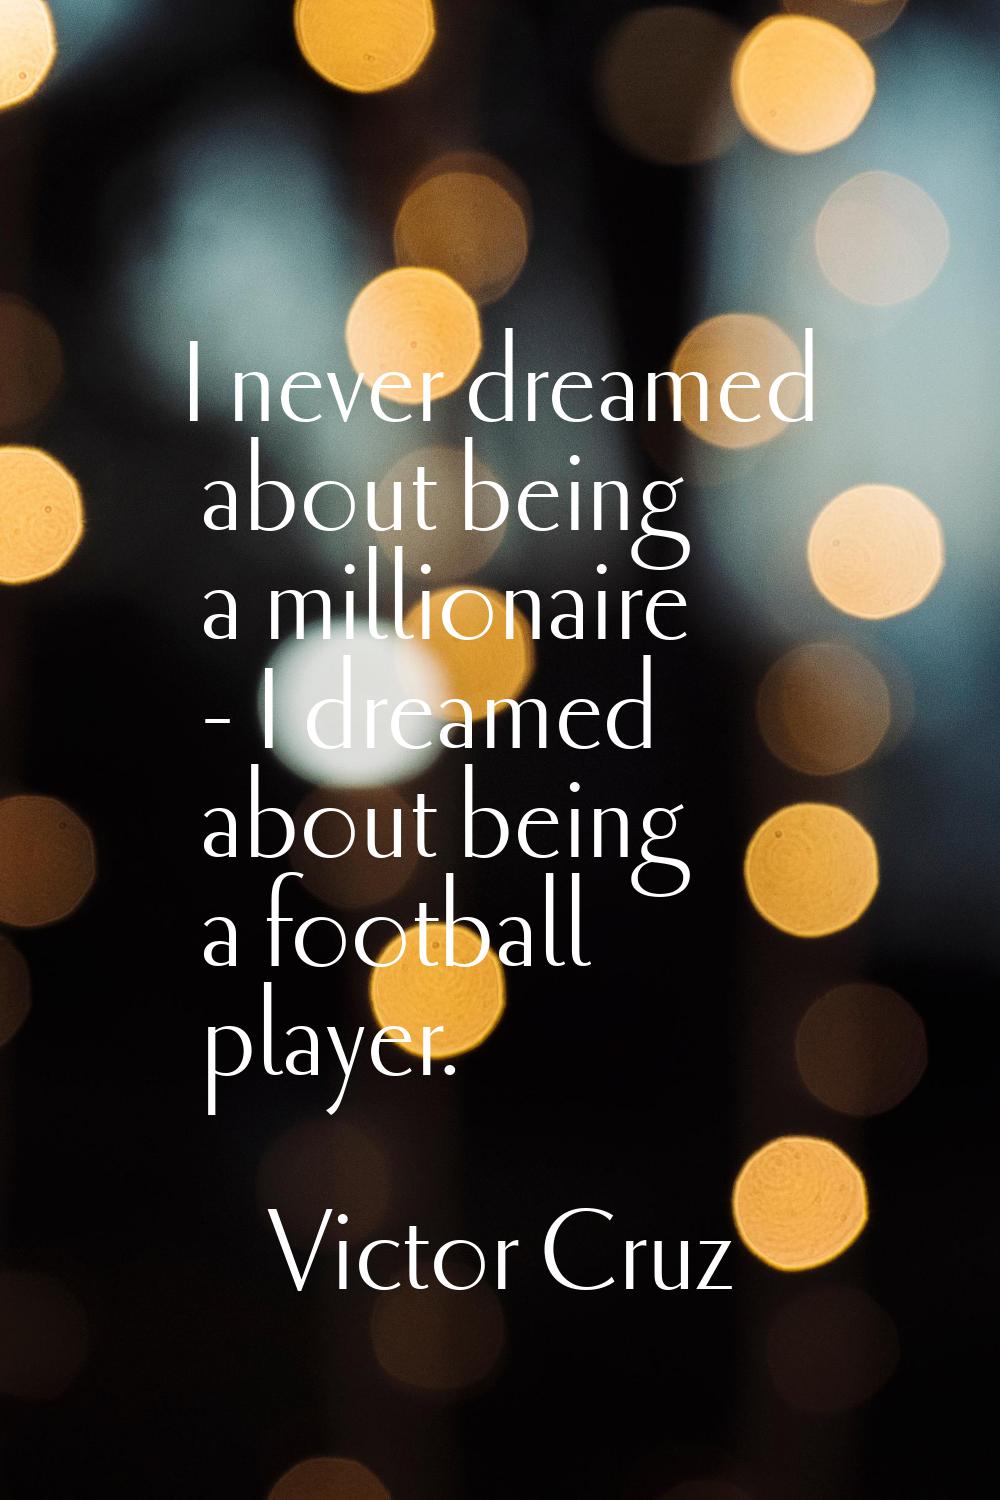 I never dreamed about being a millionaire - I dreamed about being a football player.